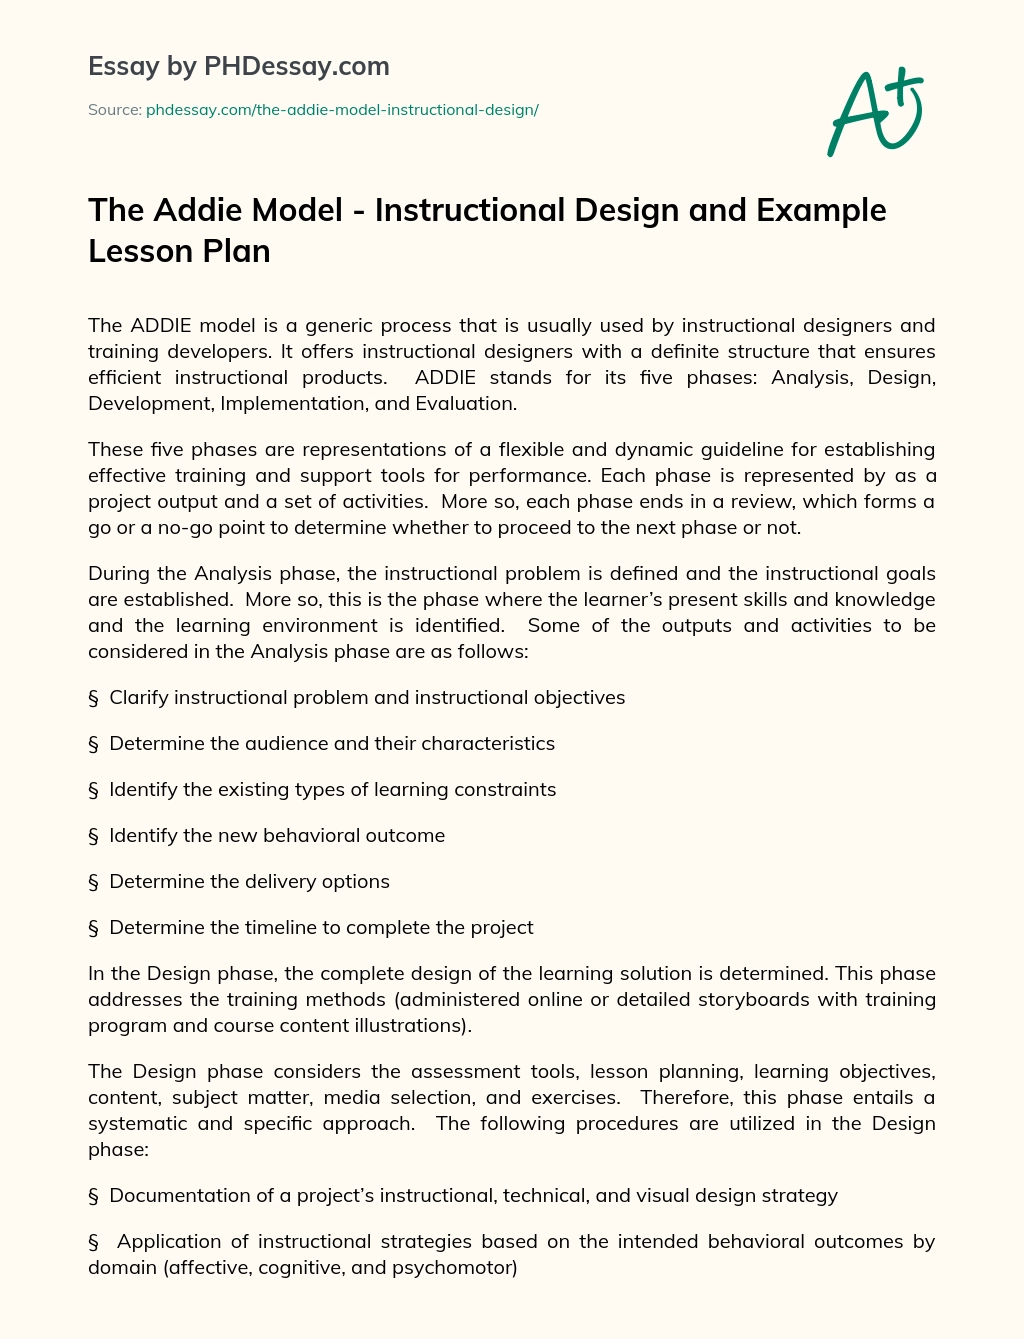 The Addie Model – Instructional Design and Example Lesson Plan essay